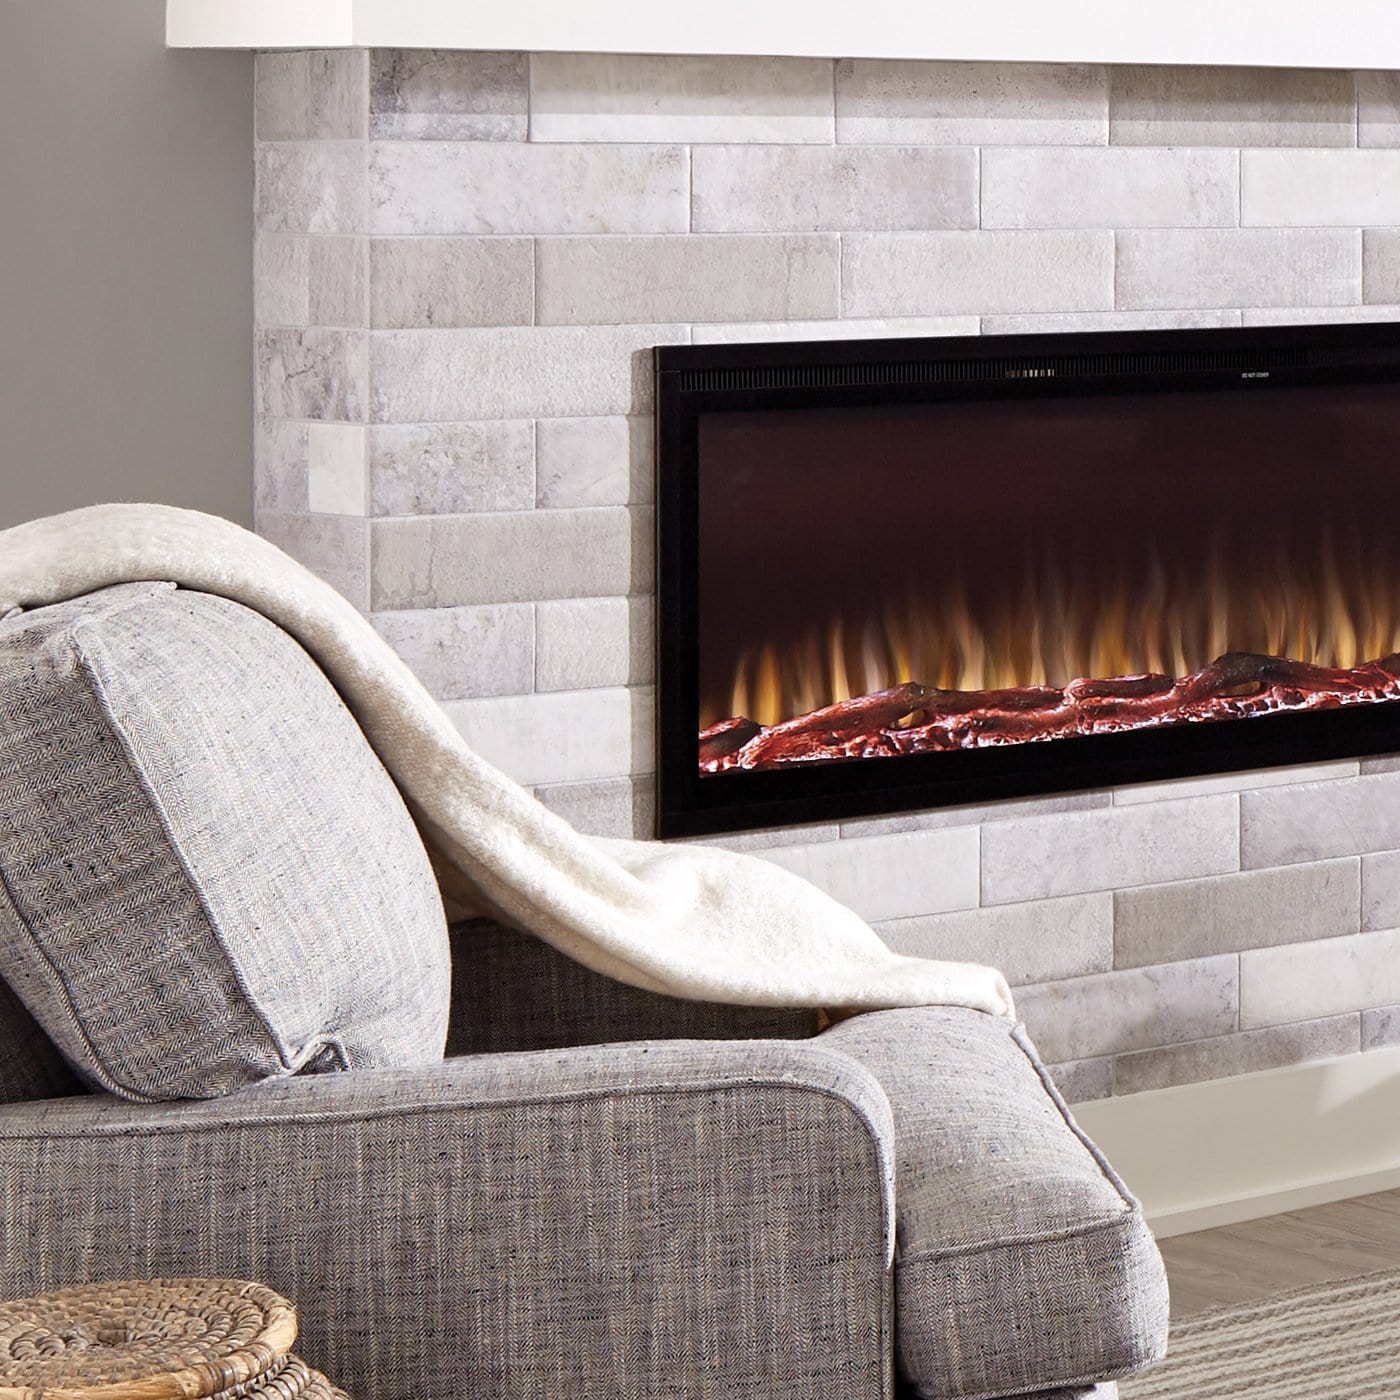 Side view of the Sideline Elite Electric Fireplace in a brick wall